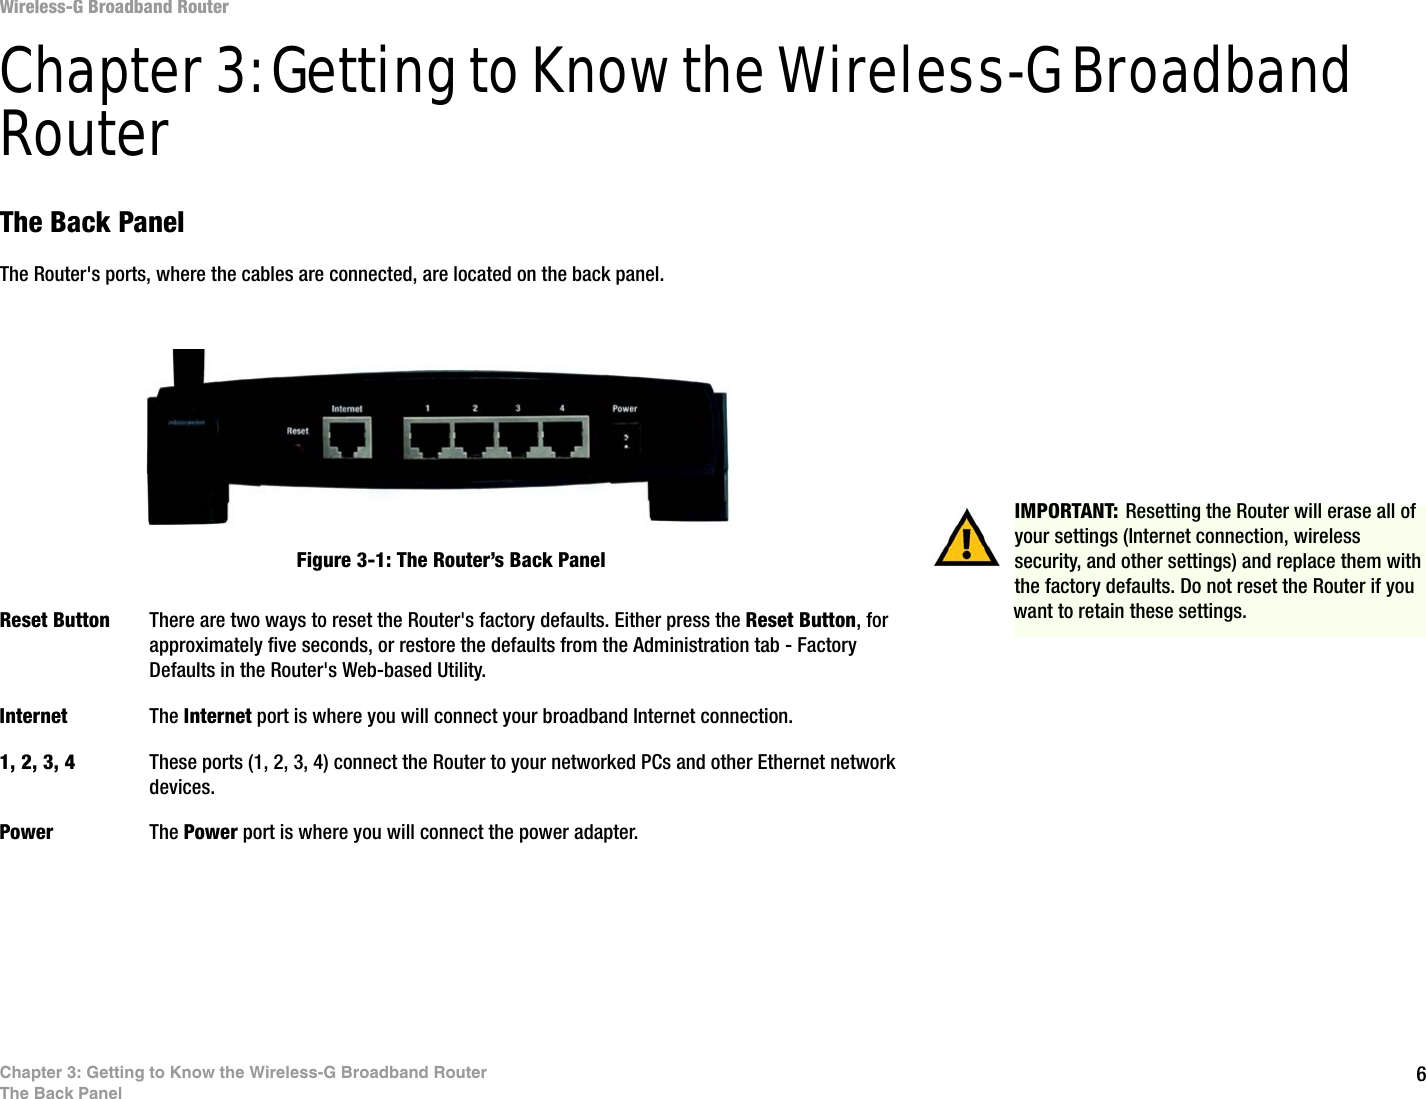 6Chapter 3: Getting to Know the Wireless-G Broadband RouterThe Back PanelWireless-G Broadband RouterChapter 3: Getting to Know the Wireless-G Broadband RouterThe Back PanelThe Router&apos;s ports, where the cables are connected, are located on the back panel.Reset Button There are two ways to reset the Router&apos;s factory defaults. Either press the Reset Button, for approximately five seconds, or restore the defaults from the Administration tab - Factory Defaults in the Router&apos;s Web-based Utility.Internet The Internet port is where you will connect your broadband Internet connection.1, 2, 3, 4 These ports (1, 2, 3, 4) connect the Router to your networked PCs and other Ethernet network devices.Power The Power port is where you will connect the power adapter.IMPORTANT: Resetting the Router will erase all of your settings (Internet connection, wireless security, and other settings) and replace them with the factory defaults. Do not reset the Router if you want to retain these settings.Figure 3-1: The Router’s Back Panel